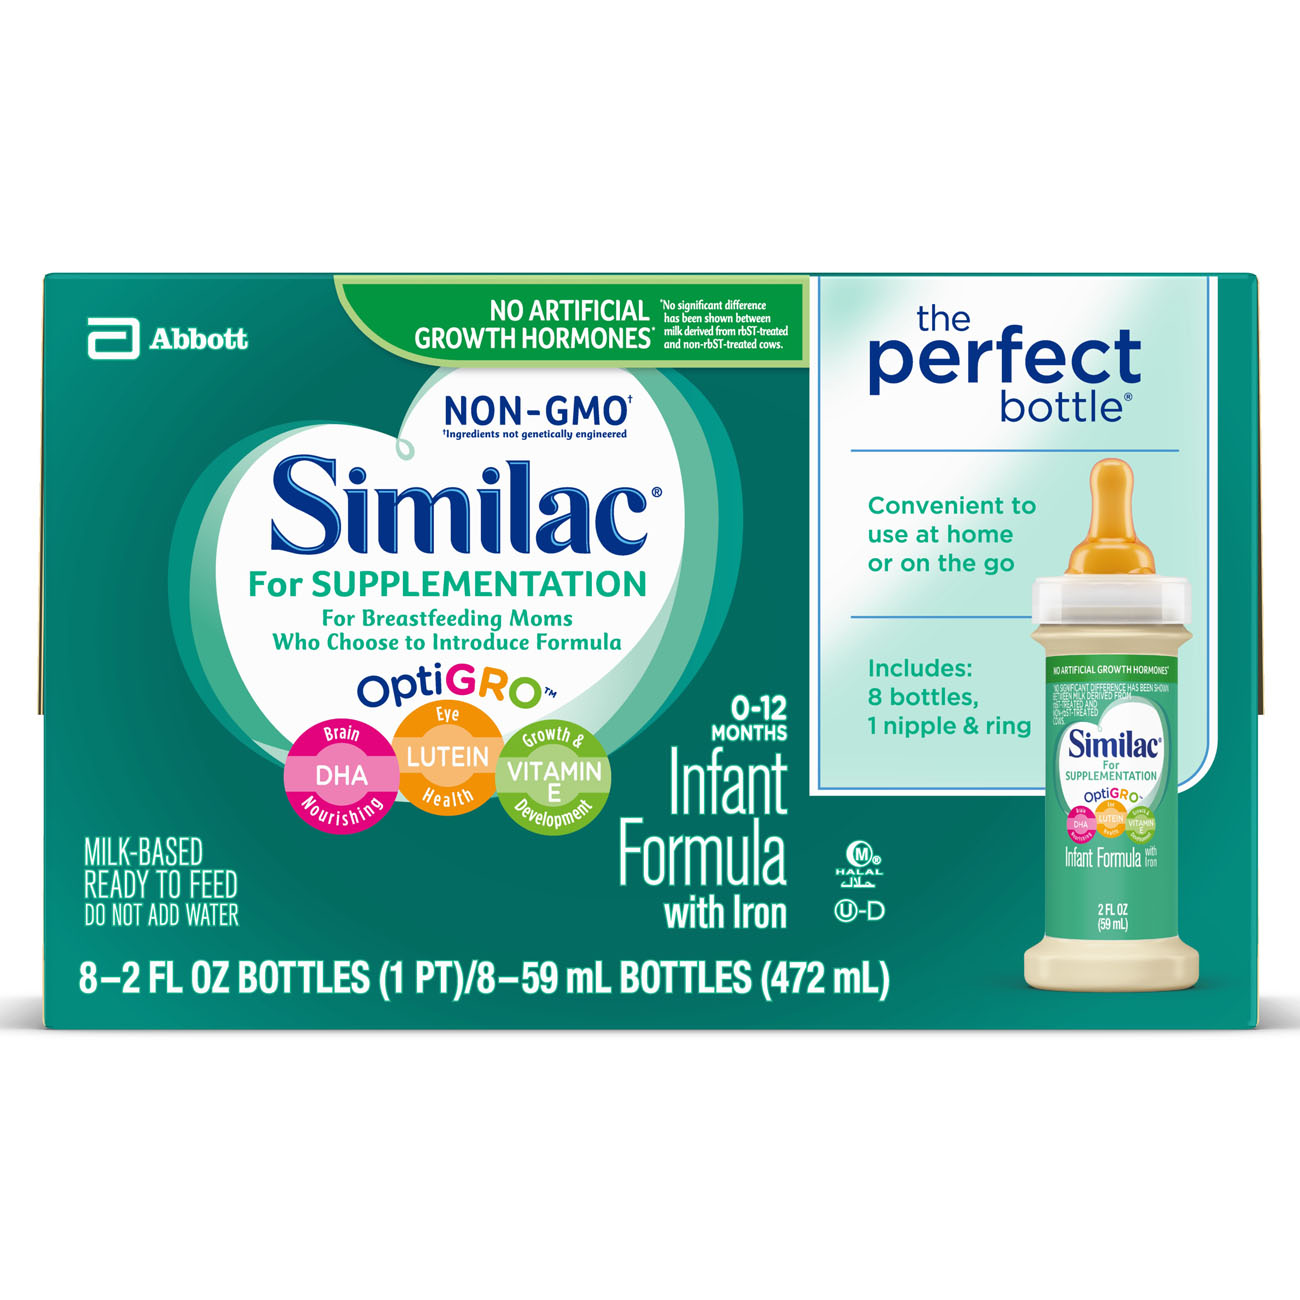 Similac For Supplementation, 48 Bottles, Gentle, Non-GMO Infant Formula, for Breastfed Babies, with Prebiotics, Supports Brain & Eye Development, Ready to Feed, 2-fl-oz Bottle - image 1 of 11